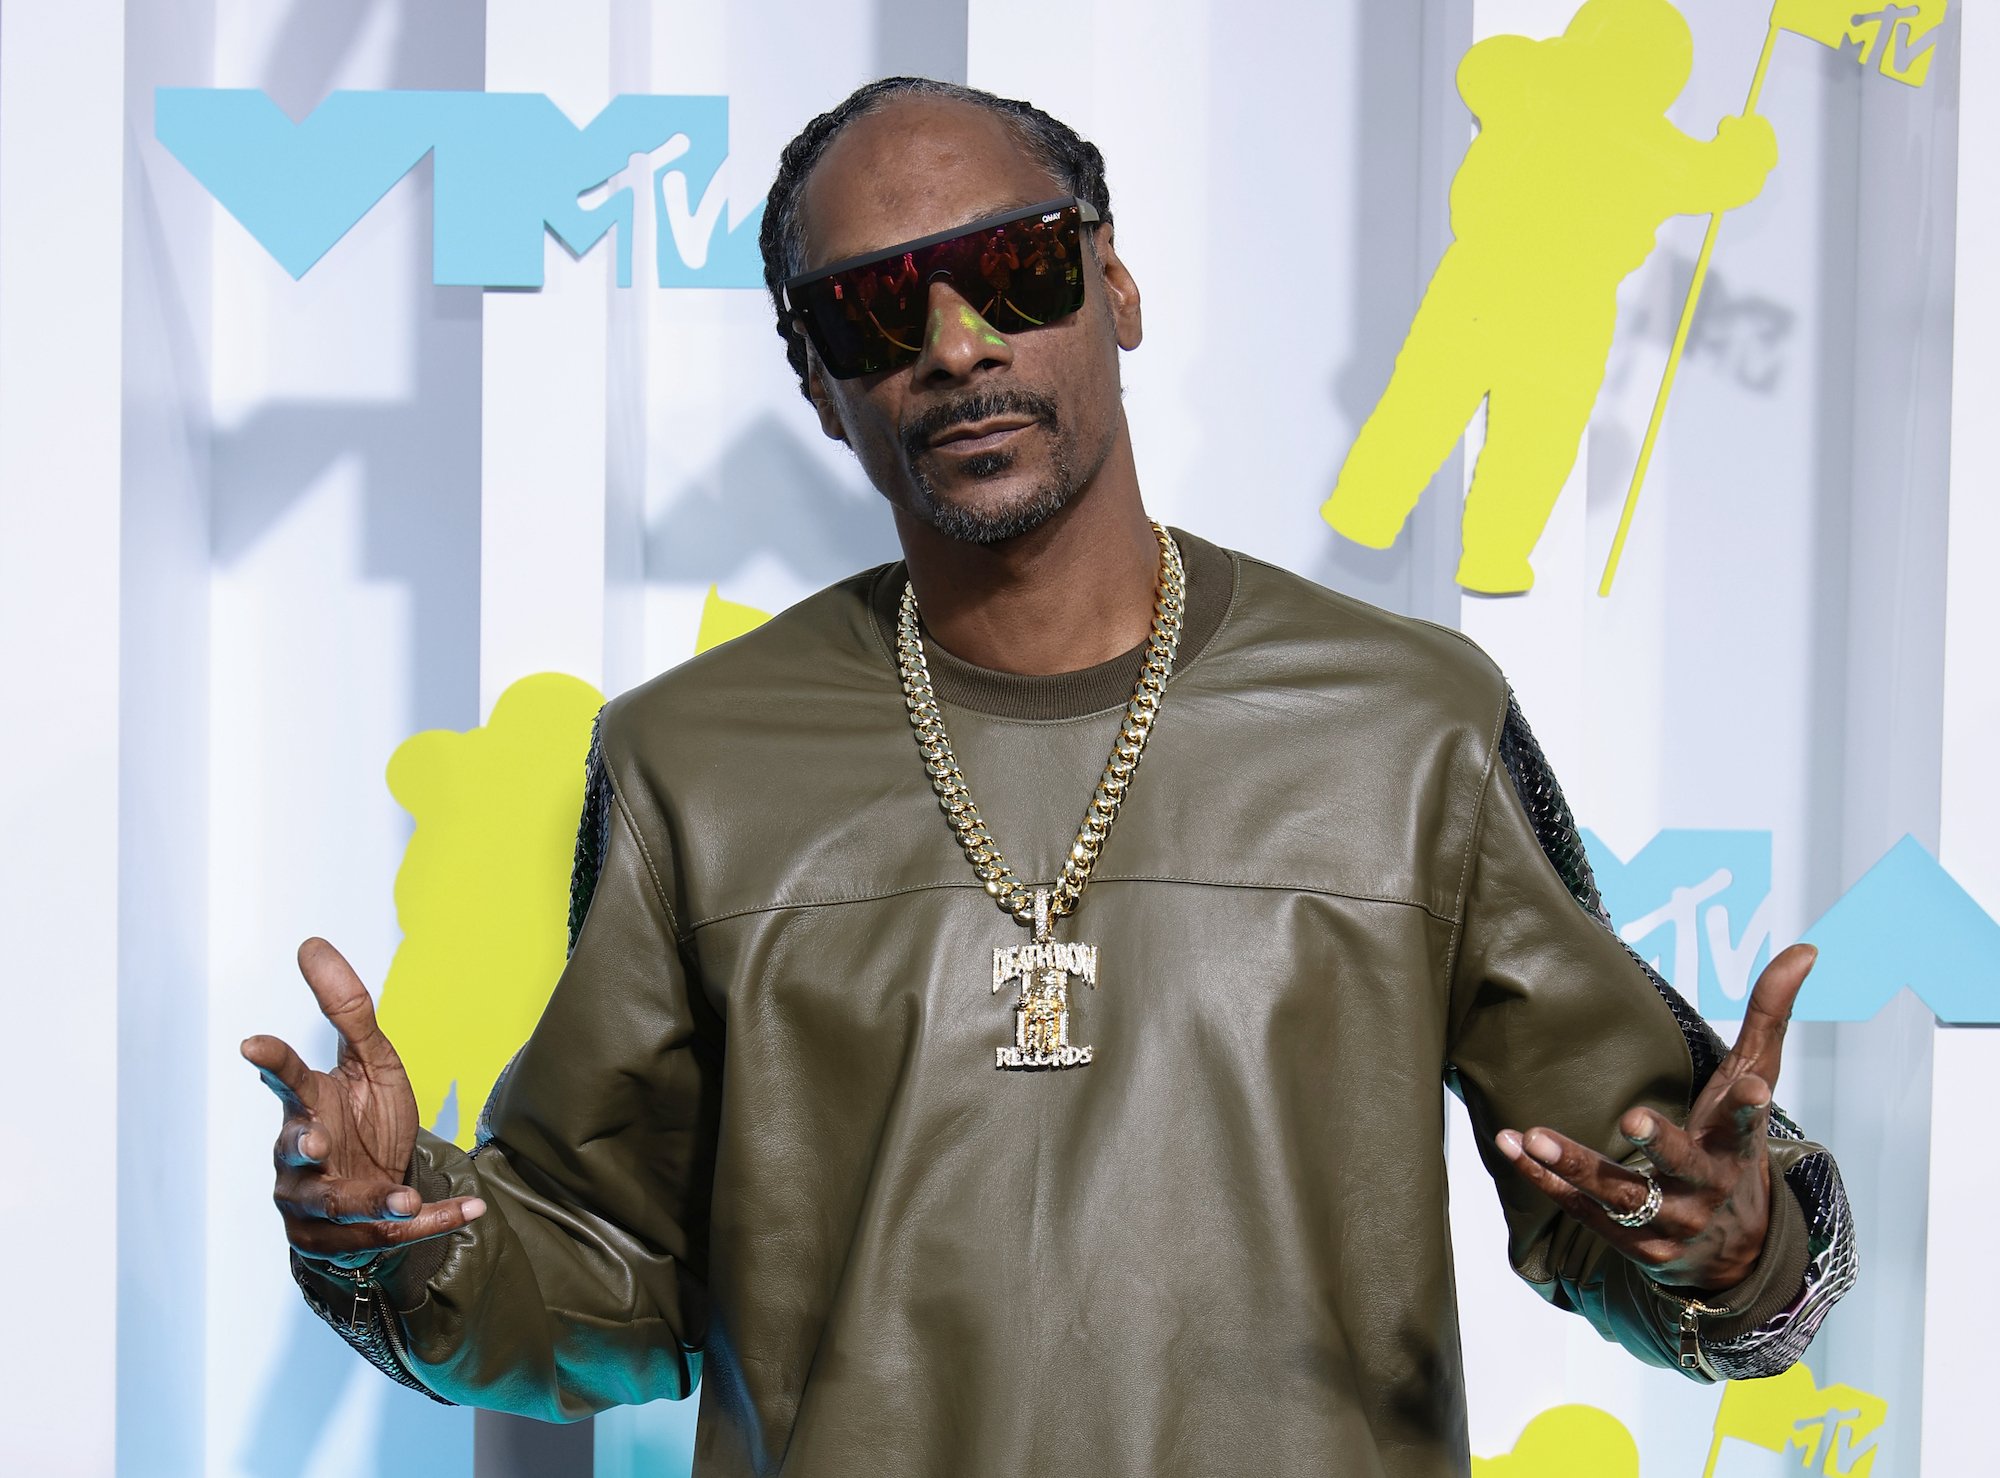 A Snoop Dogg Funko Store Is Coming to Los Angeles